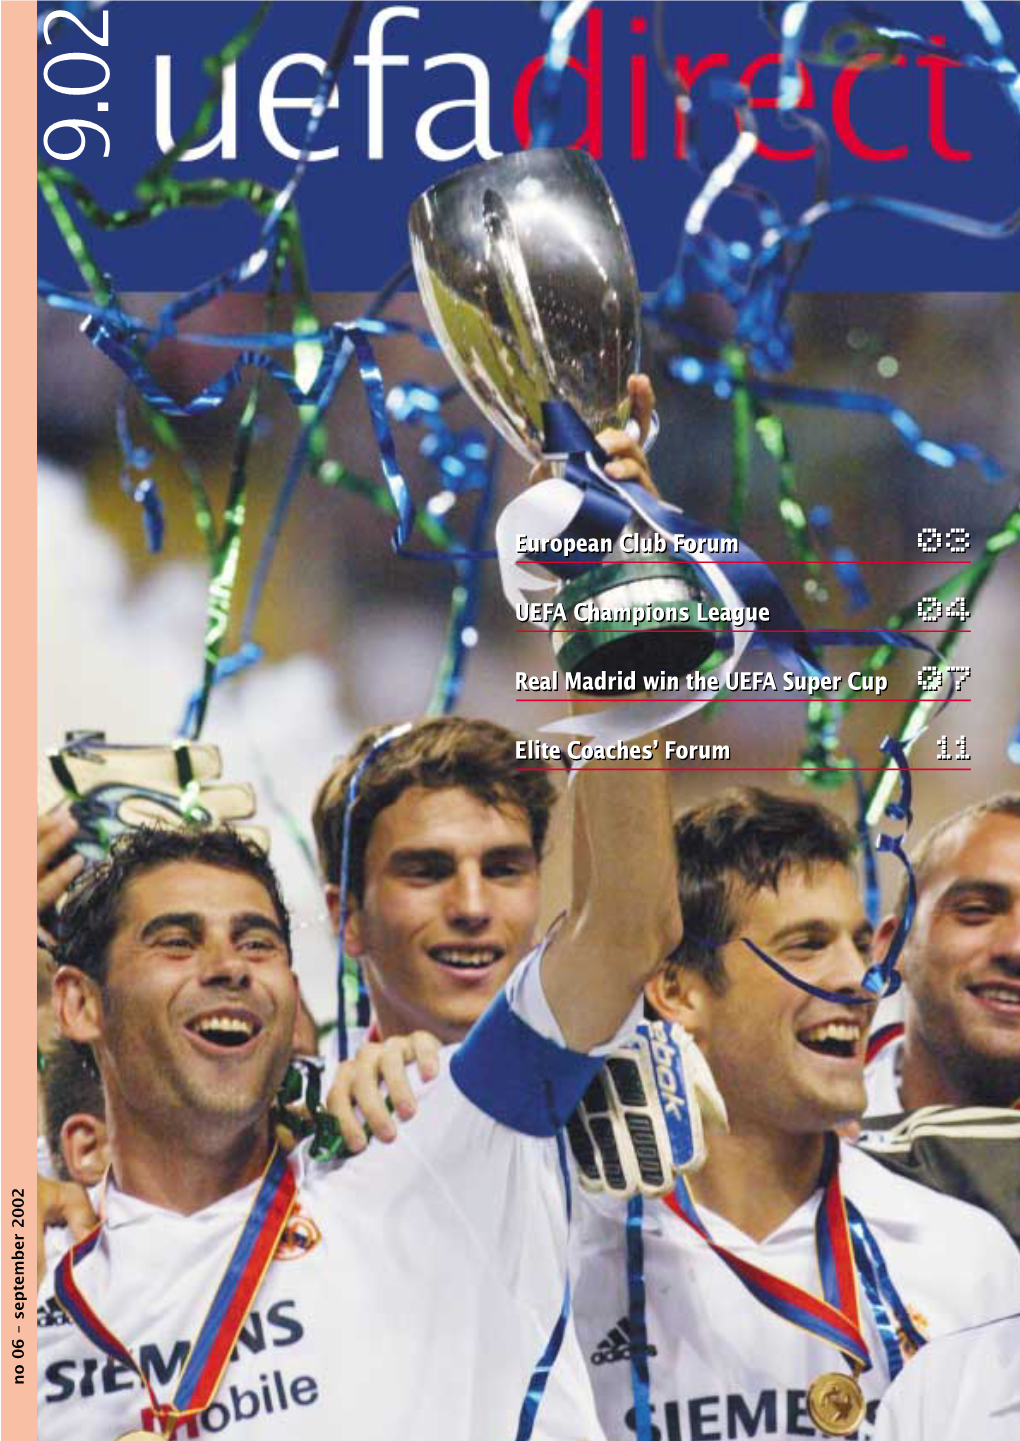 UEFA Champions League Season 04 Elite Coaches’ Forum 11 Missing from Real Madrid’S Impressive Collection of Trophies